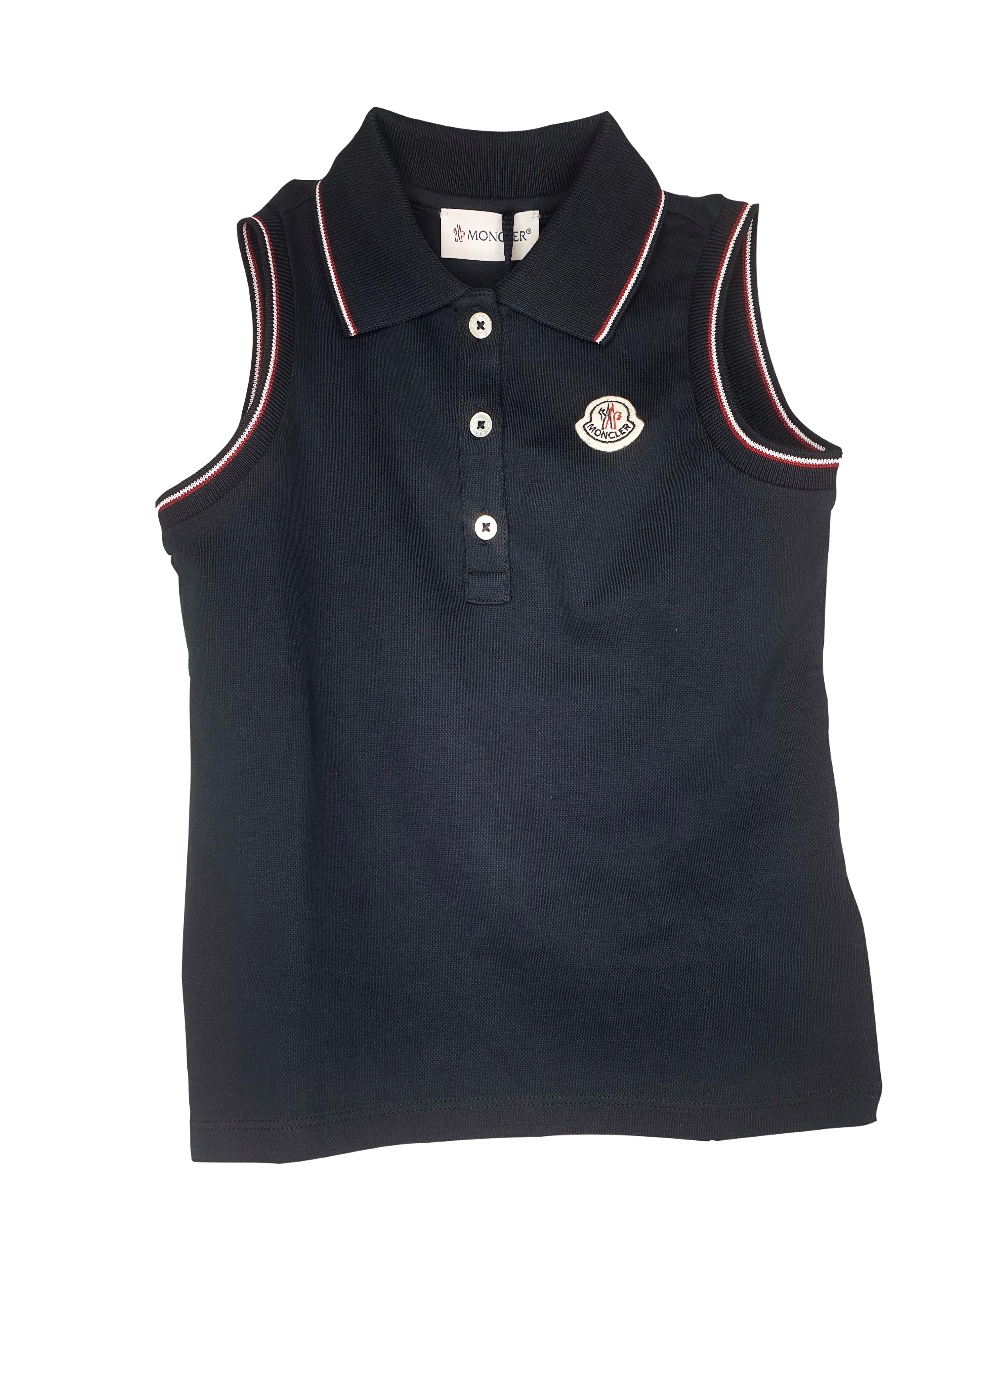 Featured image for “MONCLER POLO SMANICATA”